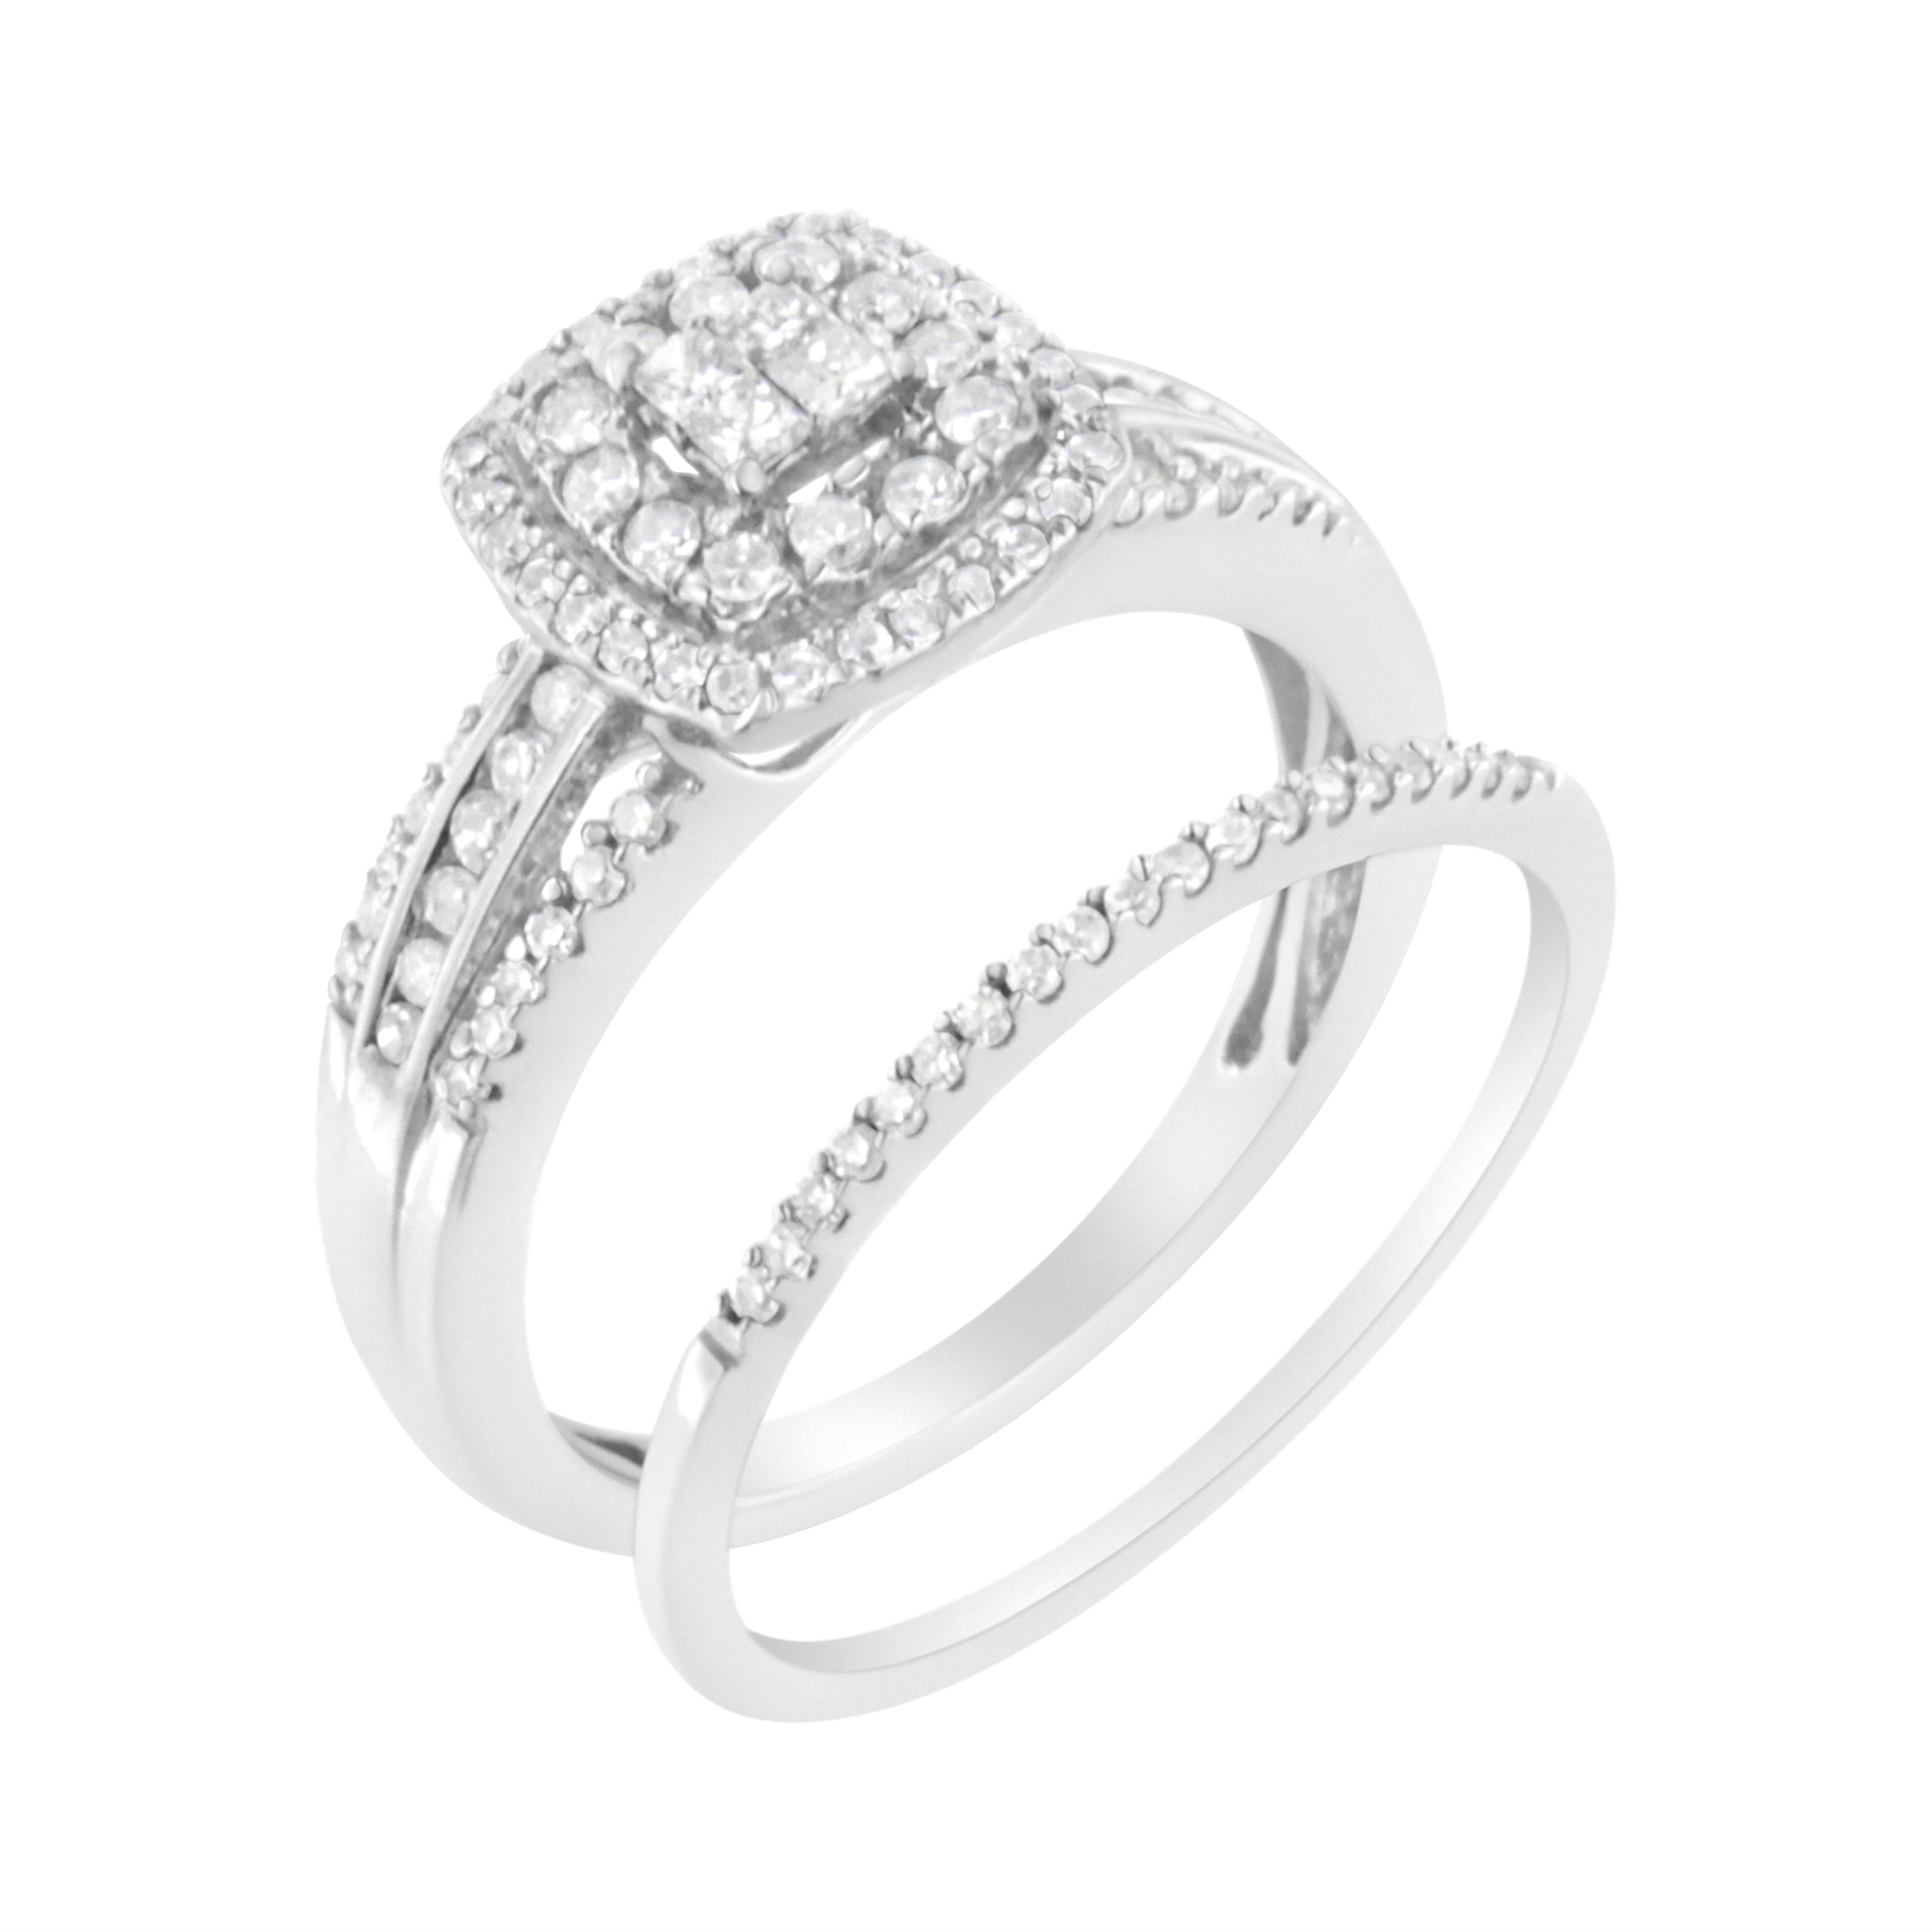 Celebrate your love with this gorgeous engagement ring and band set. The ring is designed with a classic square motif embellished with stunning, natural round and princess-cut diamonds. The band is elegant and slender and set with sparkling